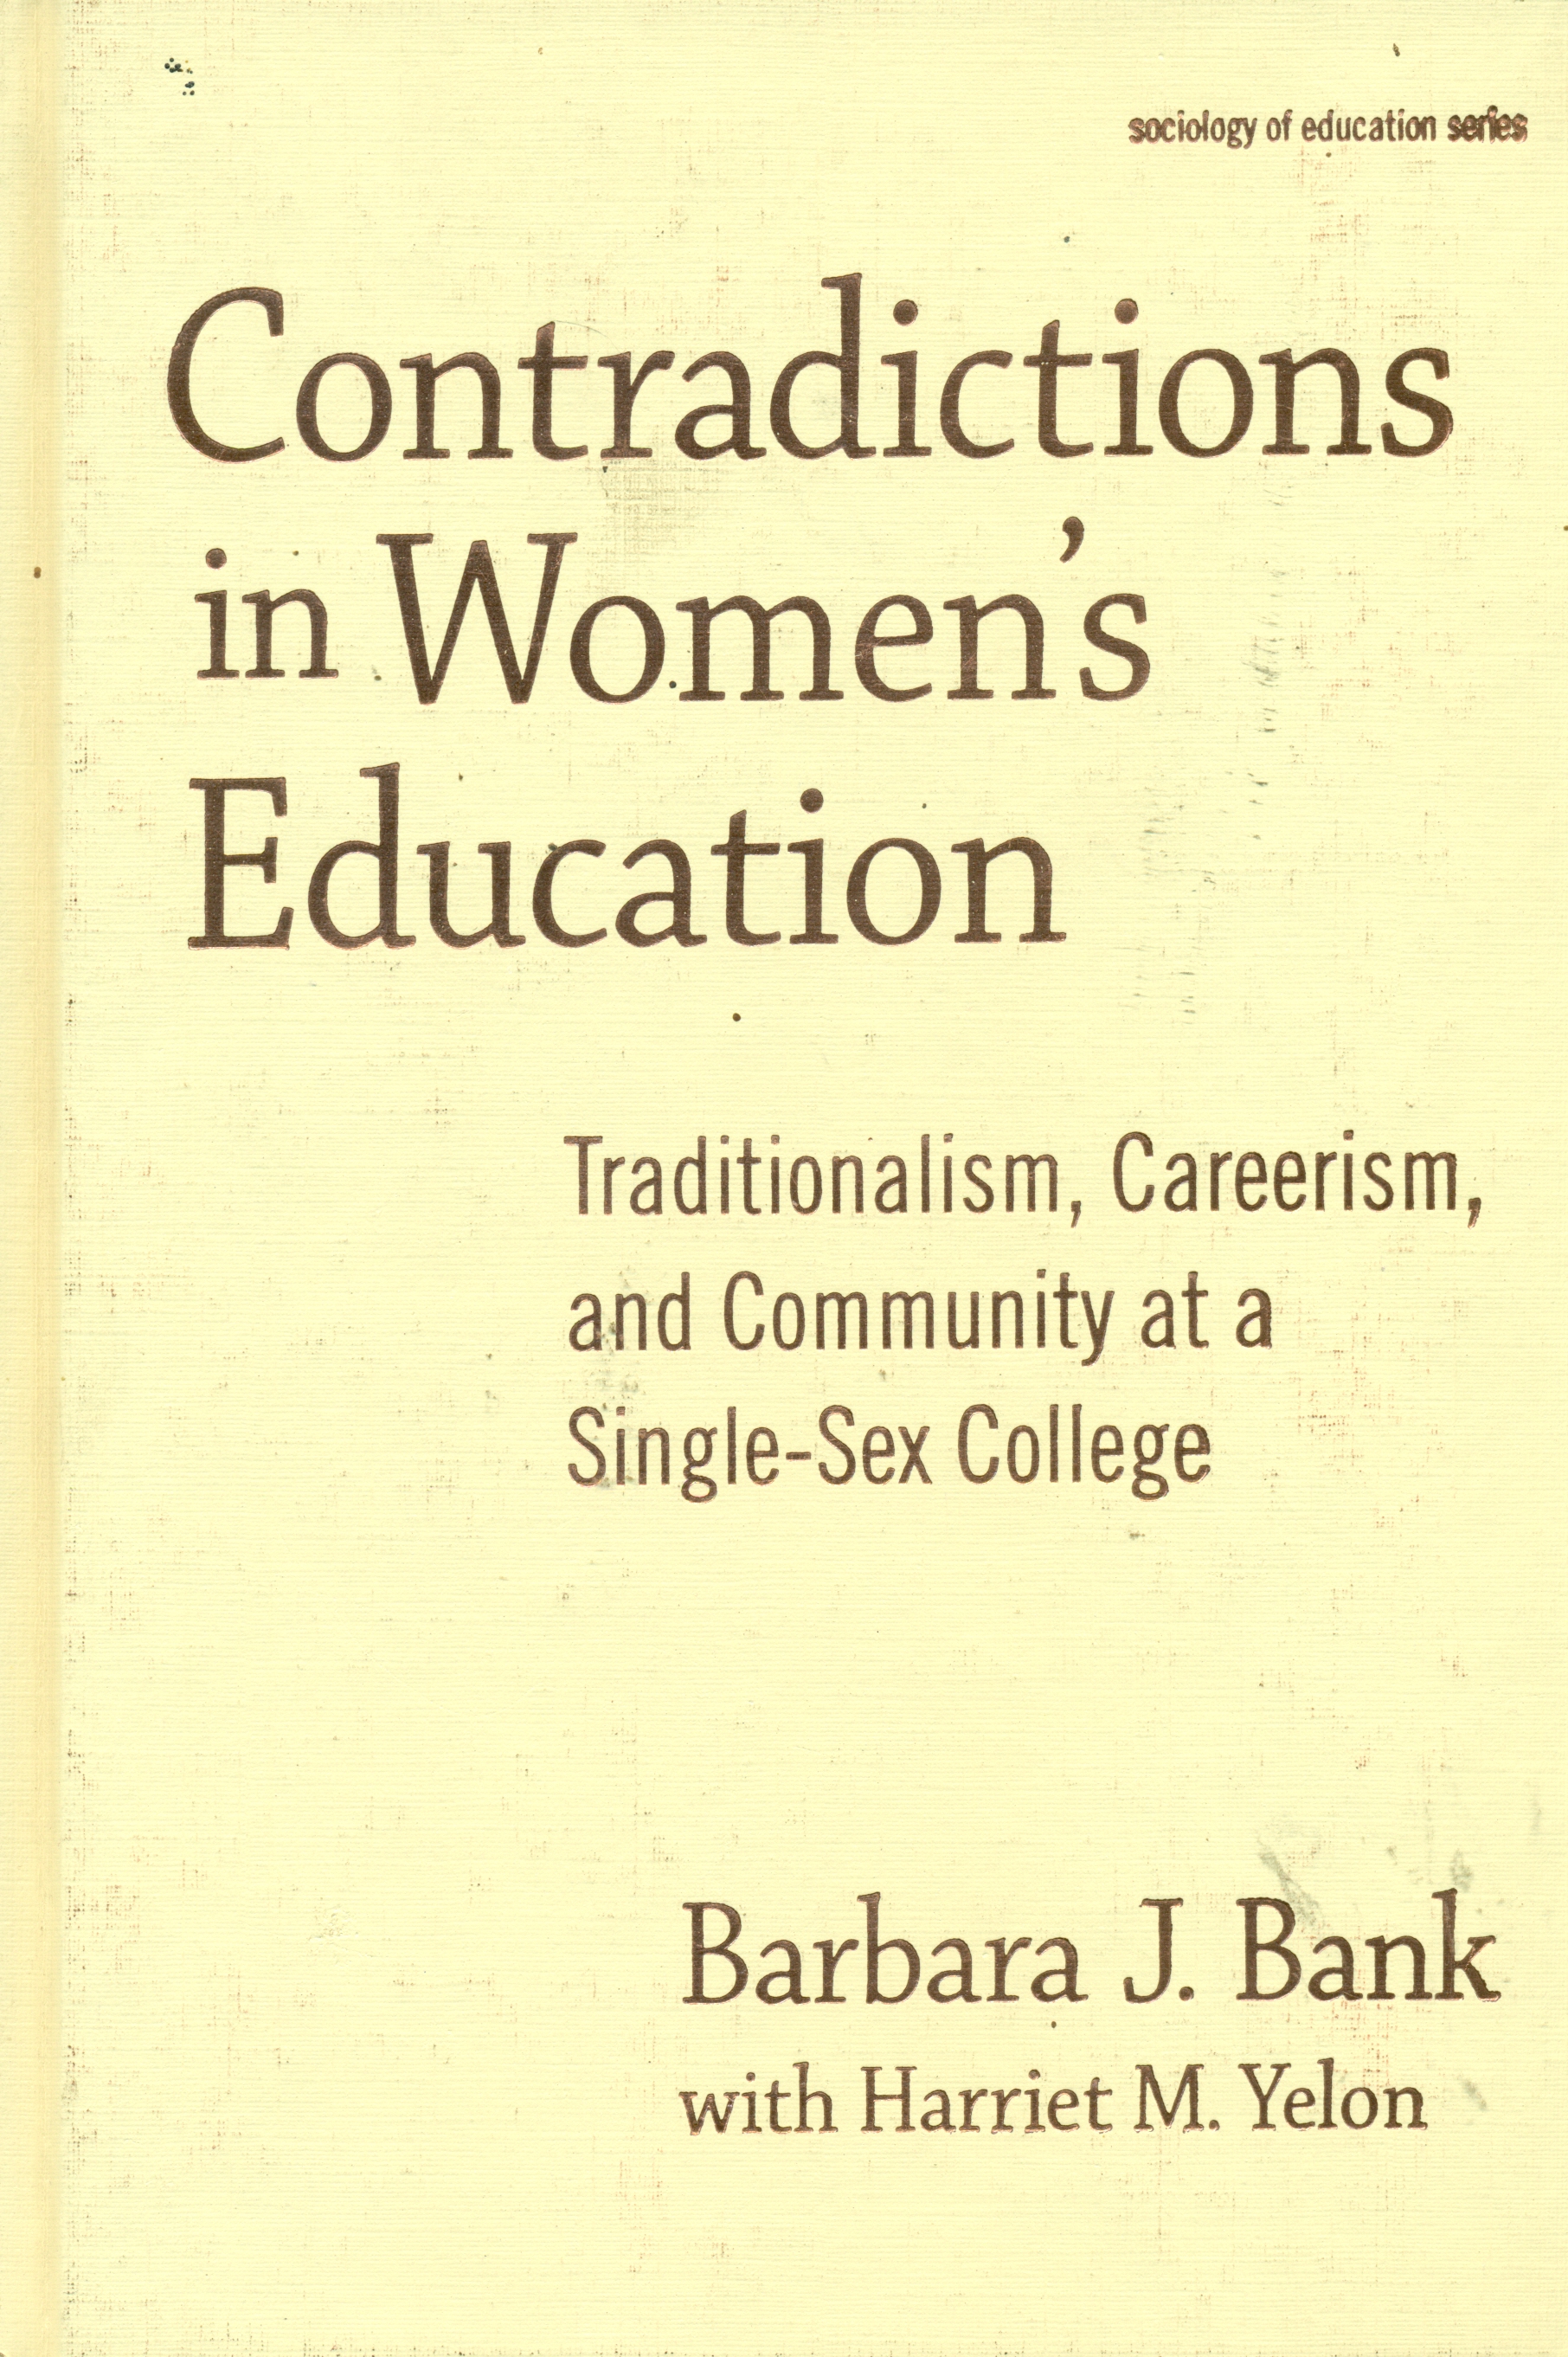 Contradictions in women's education : traditionalism, careerism, and community at a single-sex college